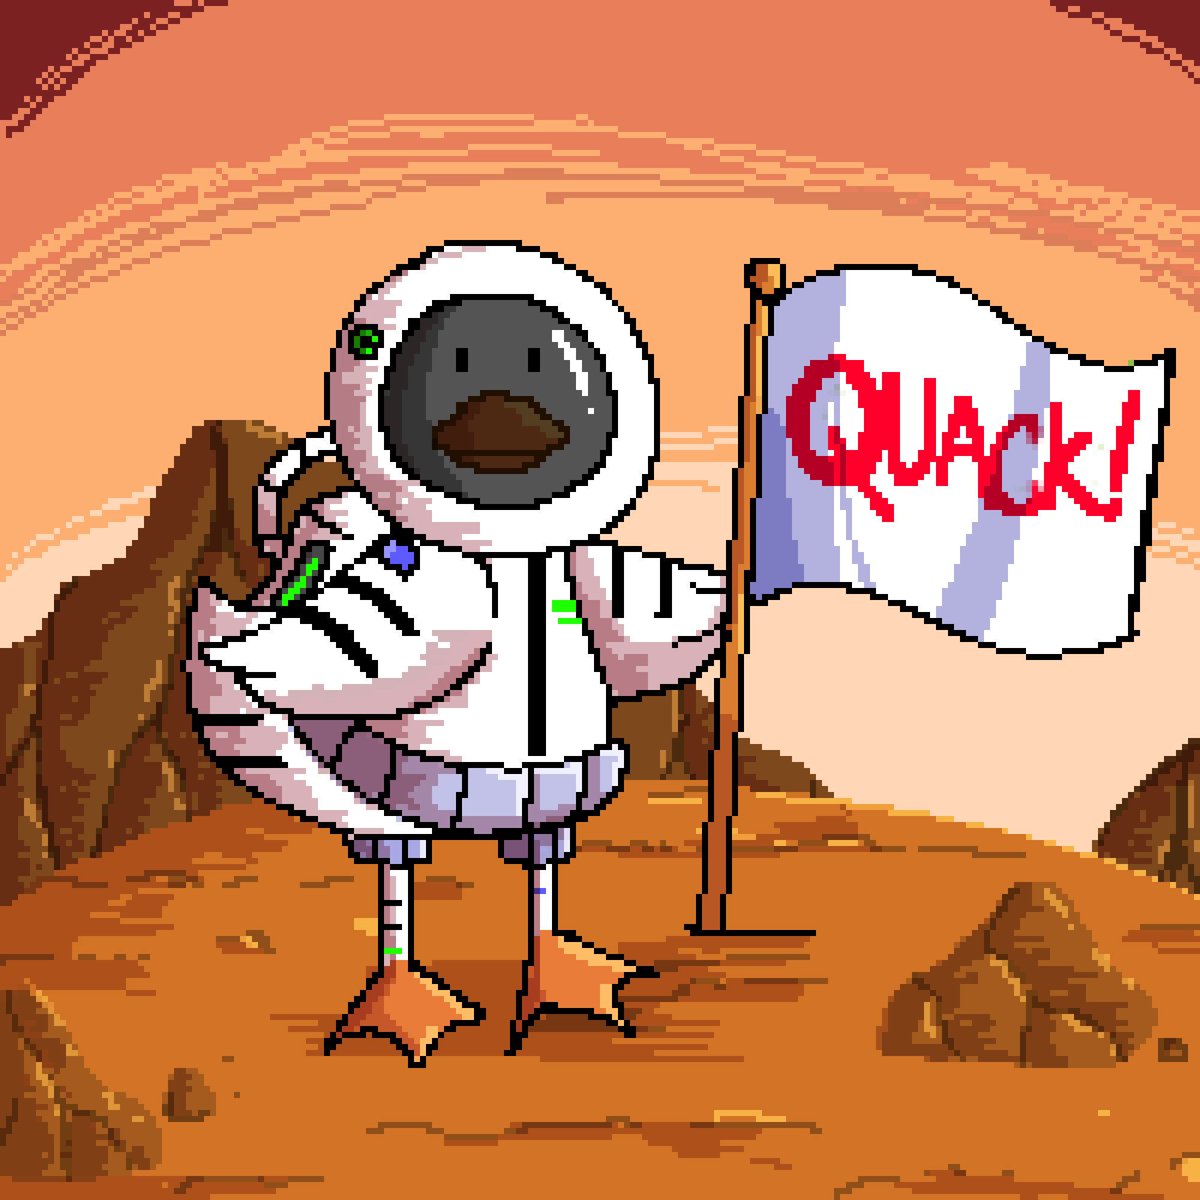 The $QUACK token is officially live.

𝐇𝐞𝐫𝐞 𝐢𝐬 𝐭𝐡𝐞 𝐨𝐟𝐟𝐢𝐜𝐢𝐚𝐥 𝐂𝐀 👇

5GddexuCGfWx1PgQ5tuHXvqqQ1t24Jwv3mPWeSxw73ys

This is only the beginning for Quack.Capital 

We are just getting duckin' started.